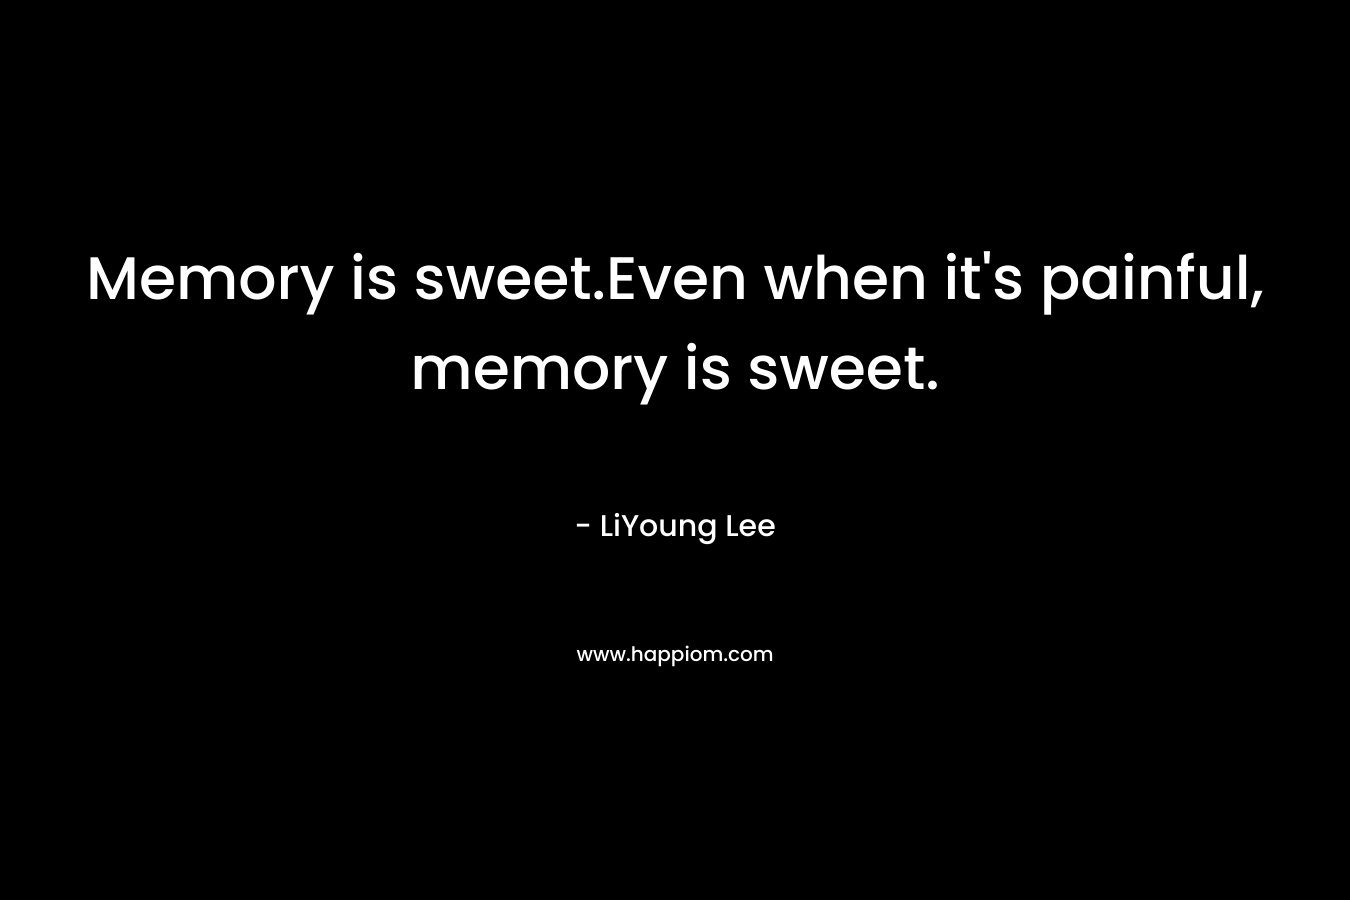 Memory is sweet.Even when it's painful, memory is sweet.